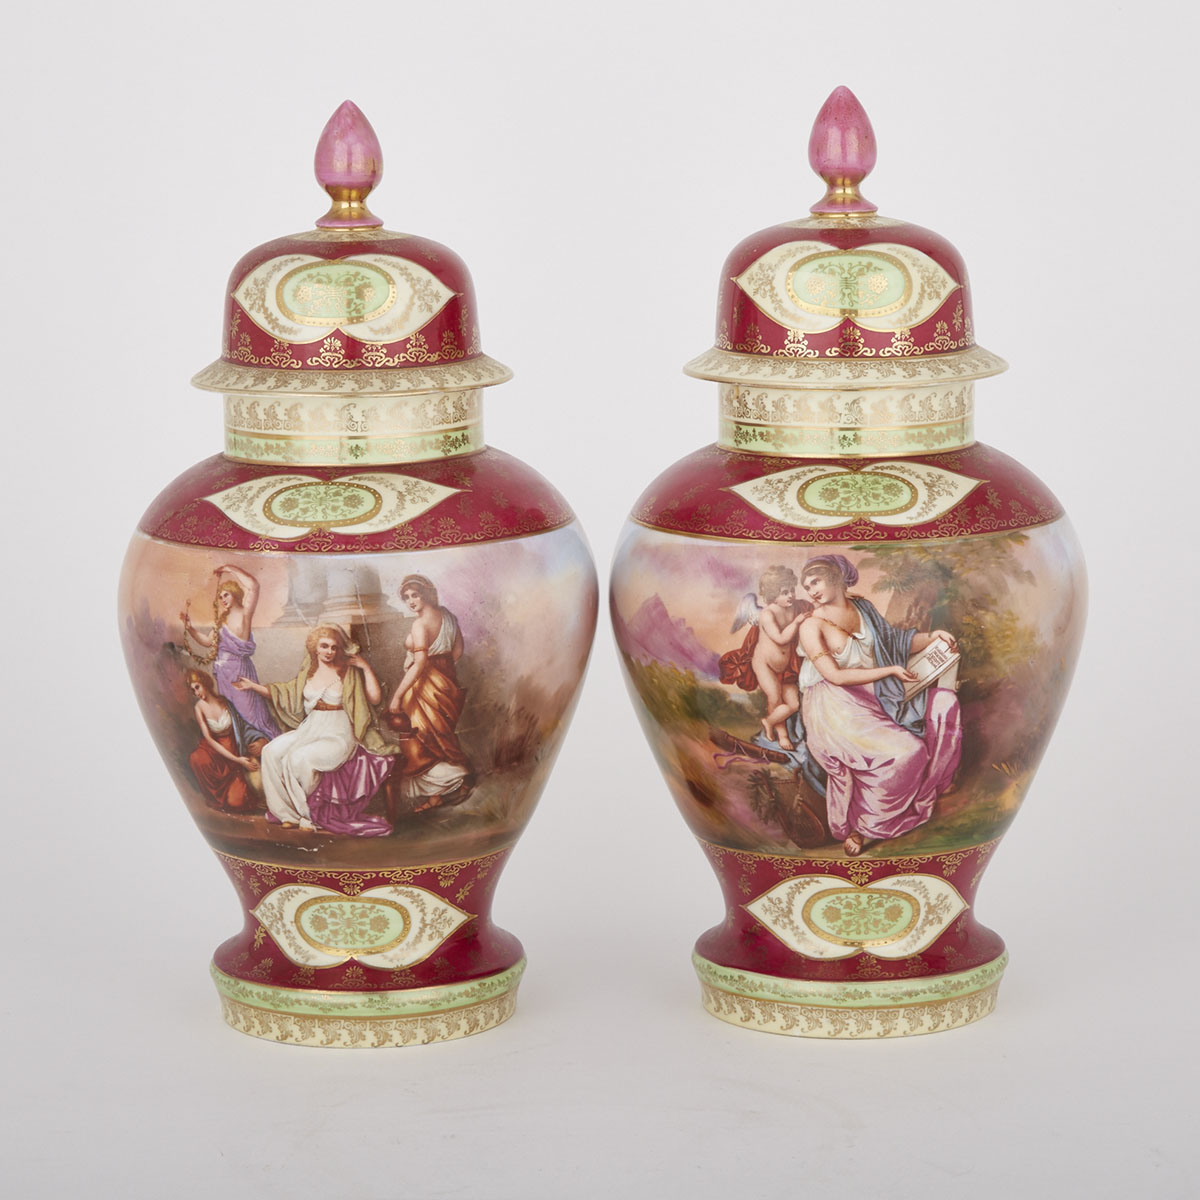 Pair of ‘Vienna’ Covered Vases, early 20th century